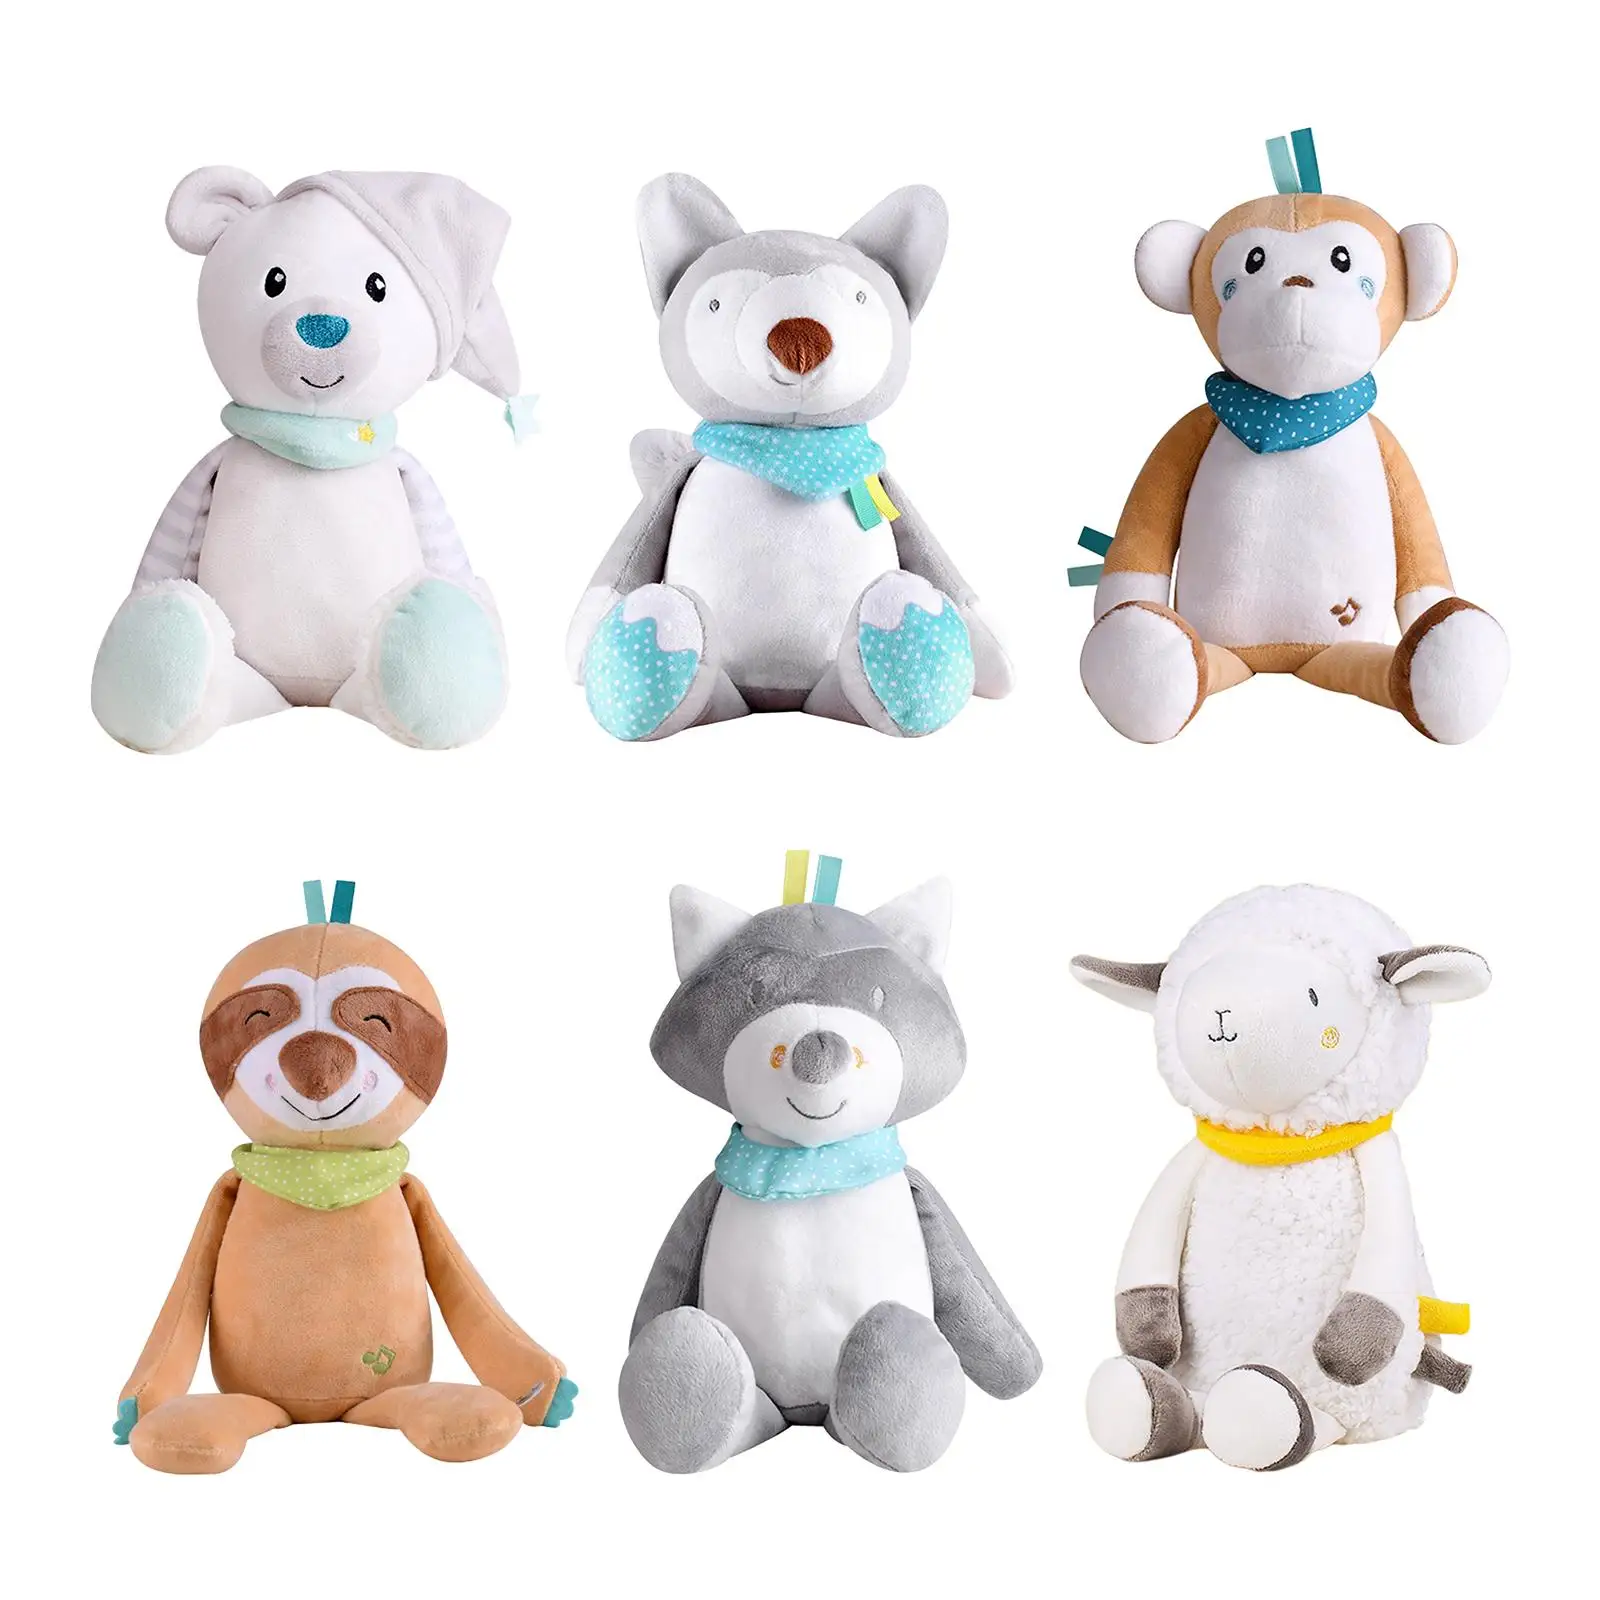 

Musical LED Stuffed Animals Creative Lullaby Light up Soft Singing Pillows Plush Toys for Girls Boys Newborns Toddlers Kids